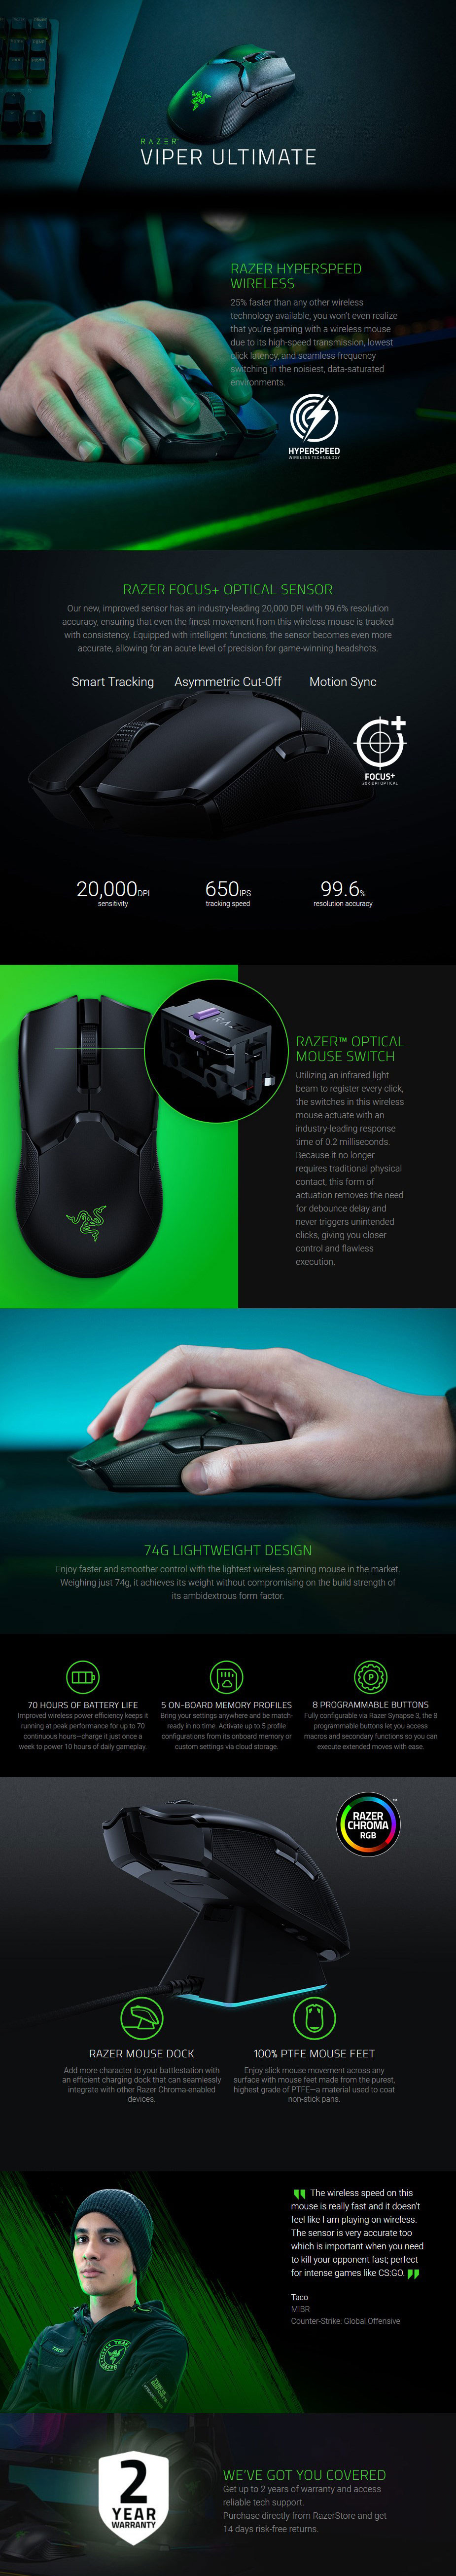 Razer Viper Ultimate Wireless Gaming Mouse with Charging Dock RZ01-03050100-R3A1 Details